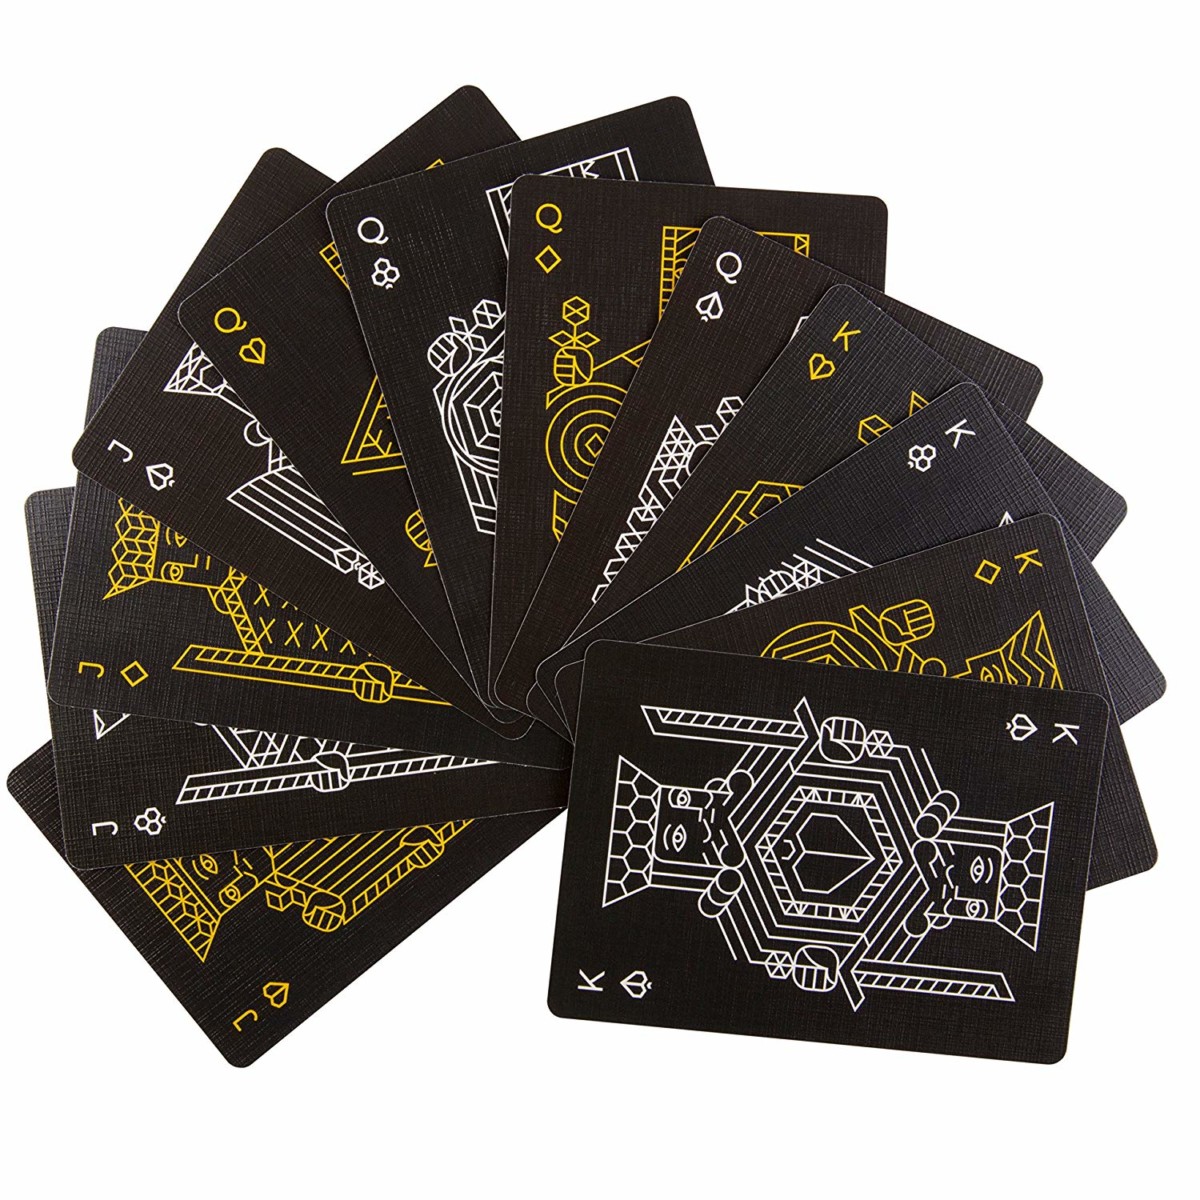 Killer Bees Playing Card Deck by Ellusionist